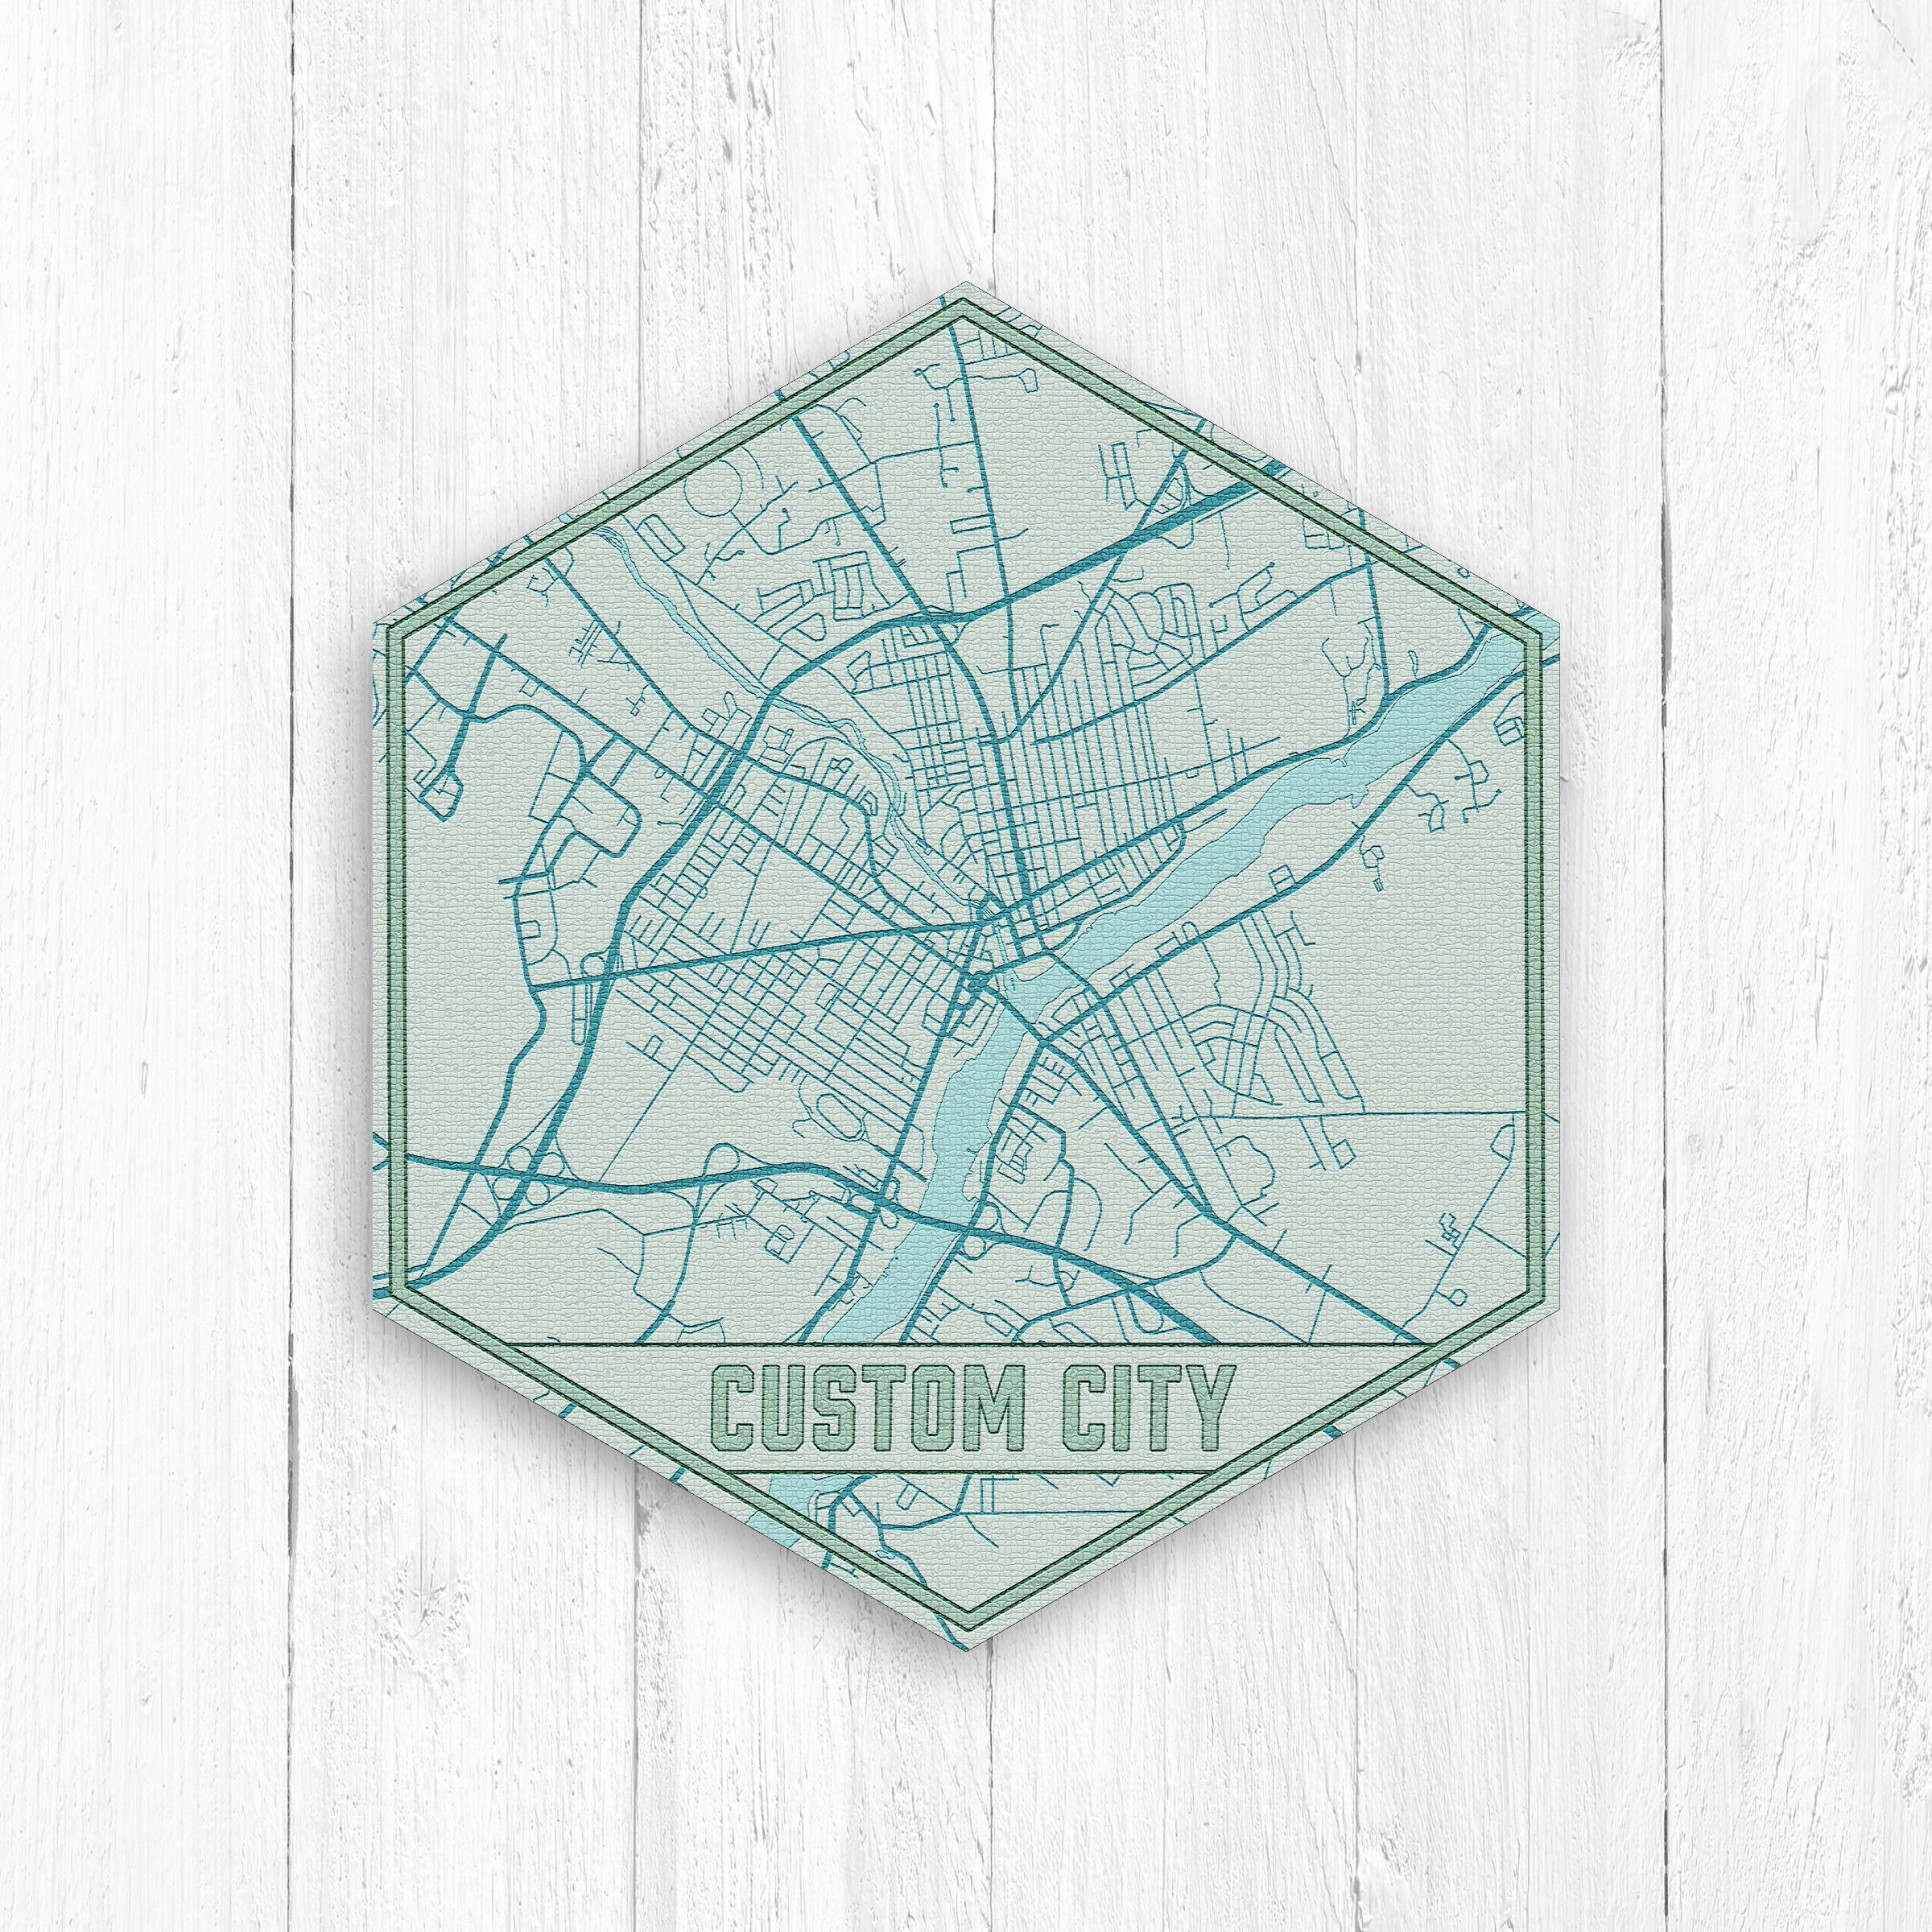 Custom City Map Hexagon Canvas By Printed Marketplace